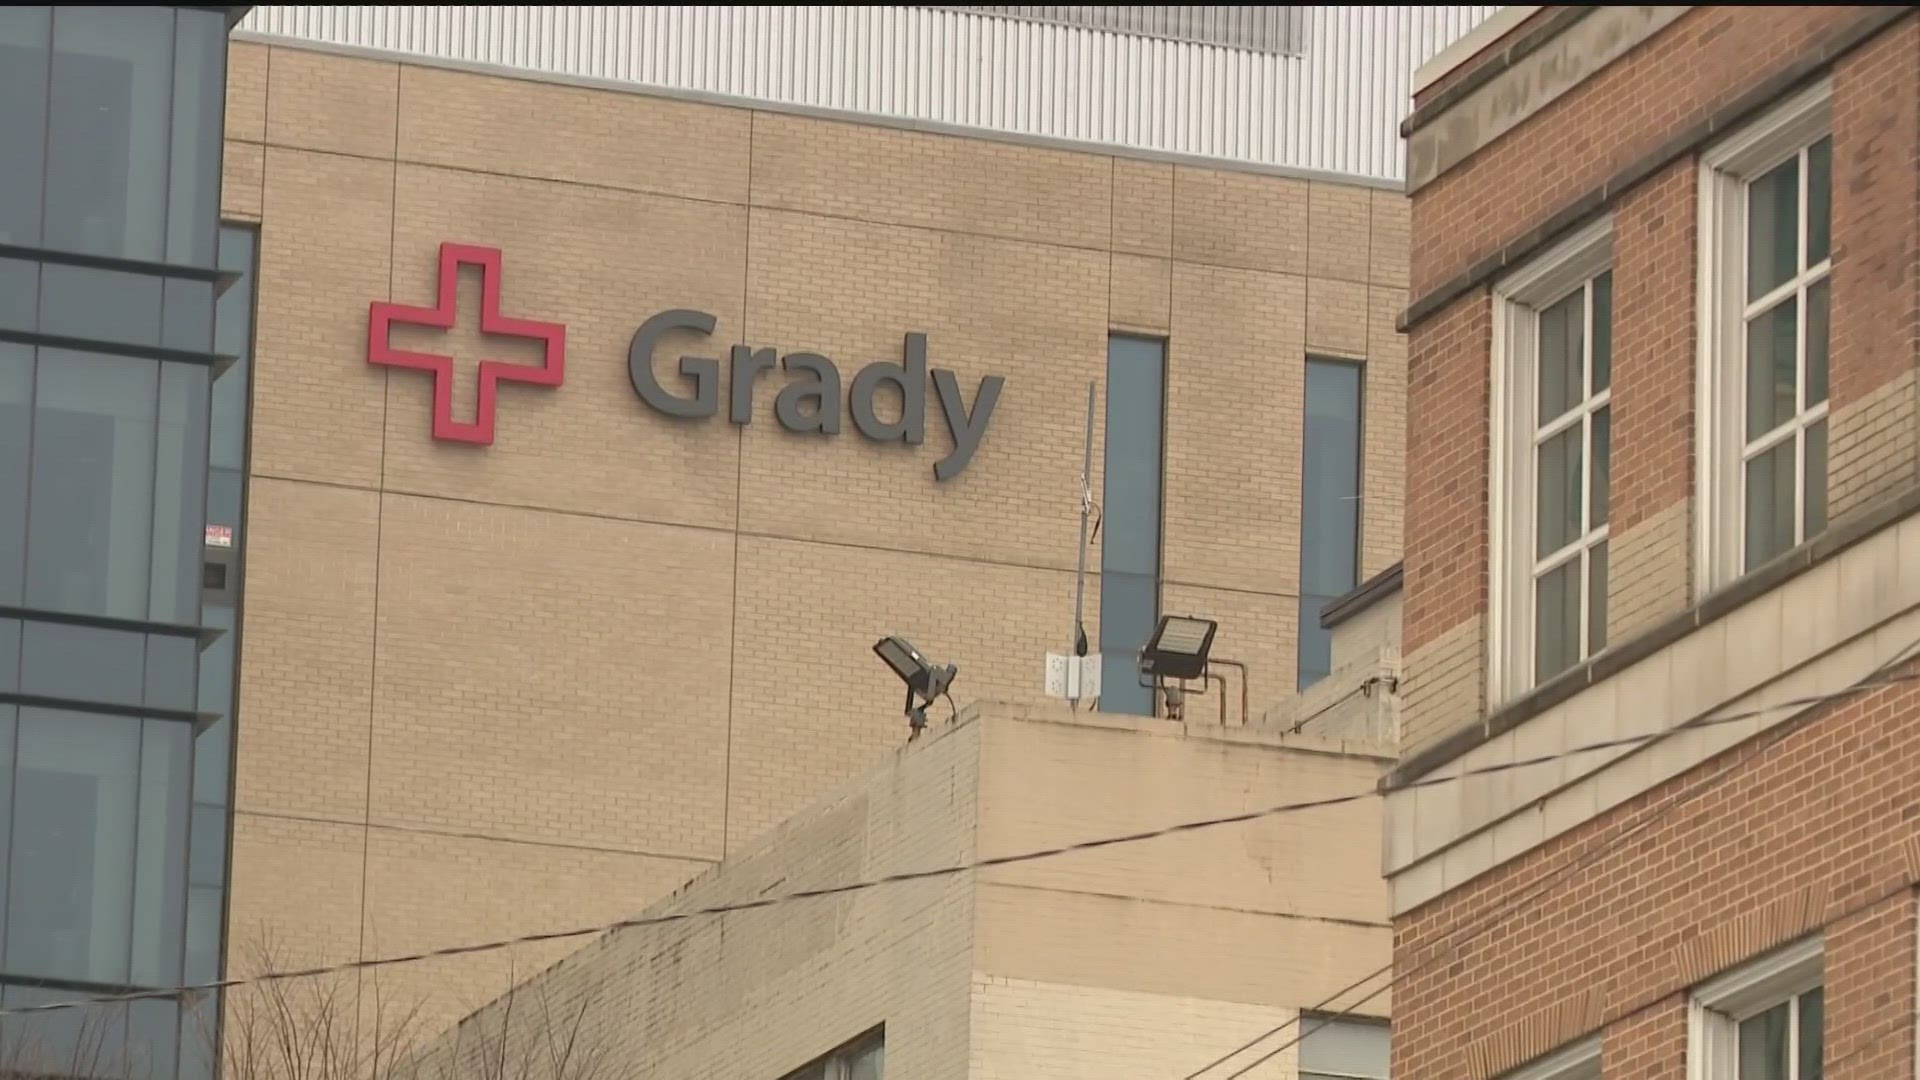 Grady says the demand for access to healthcare is still growing after Wellstar's Atlanta Medical Center closed.